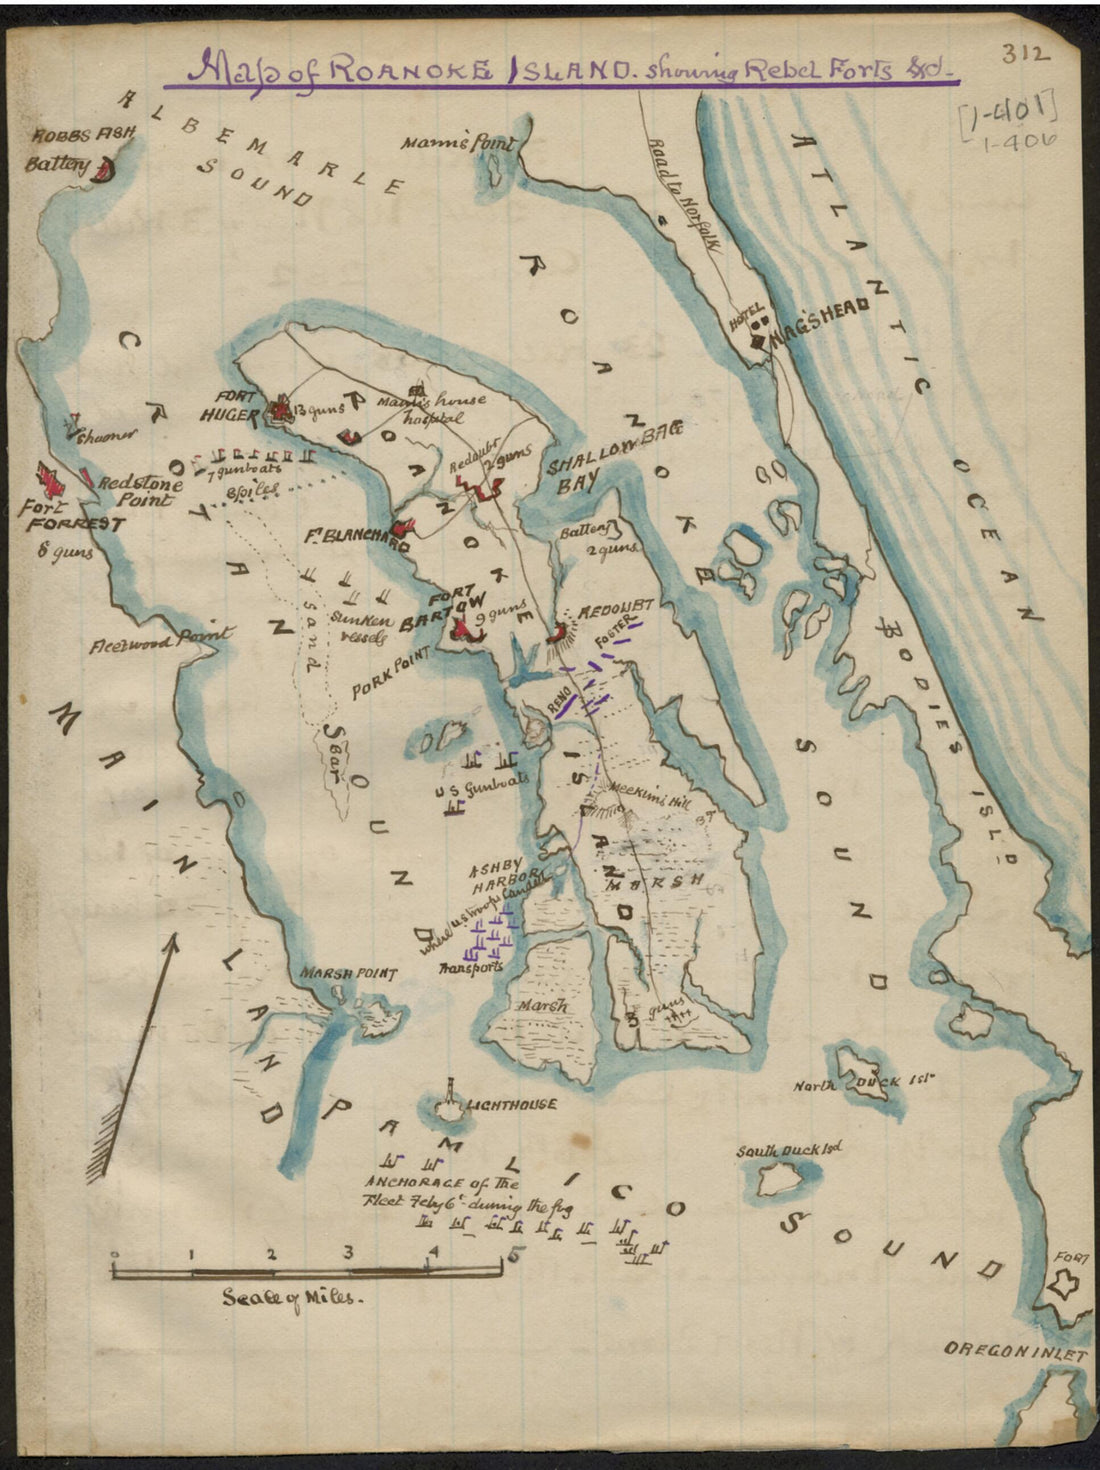 This old map of Map of Roanoke Island Showing Rebel Forts from 1862 was created by Robert Knox Sneden in 1862